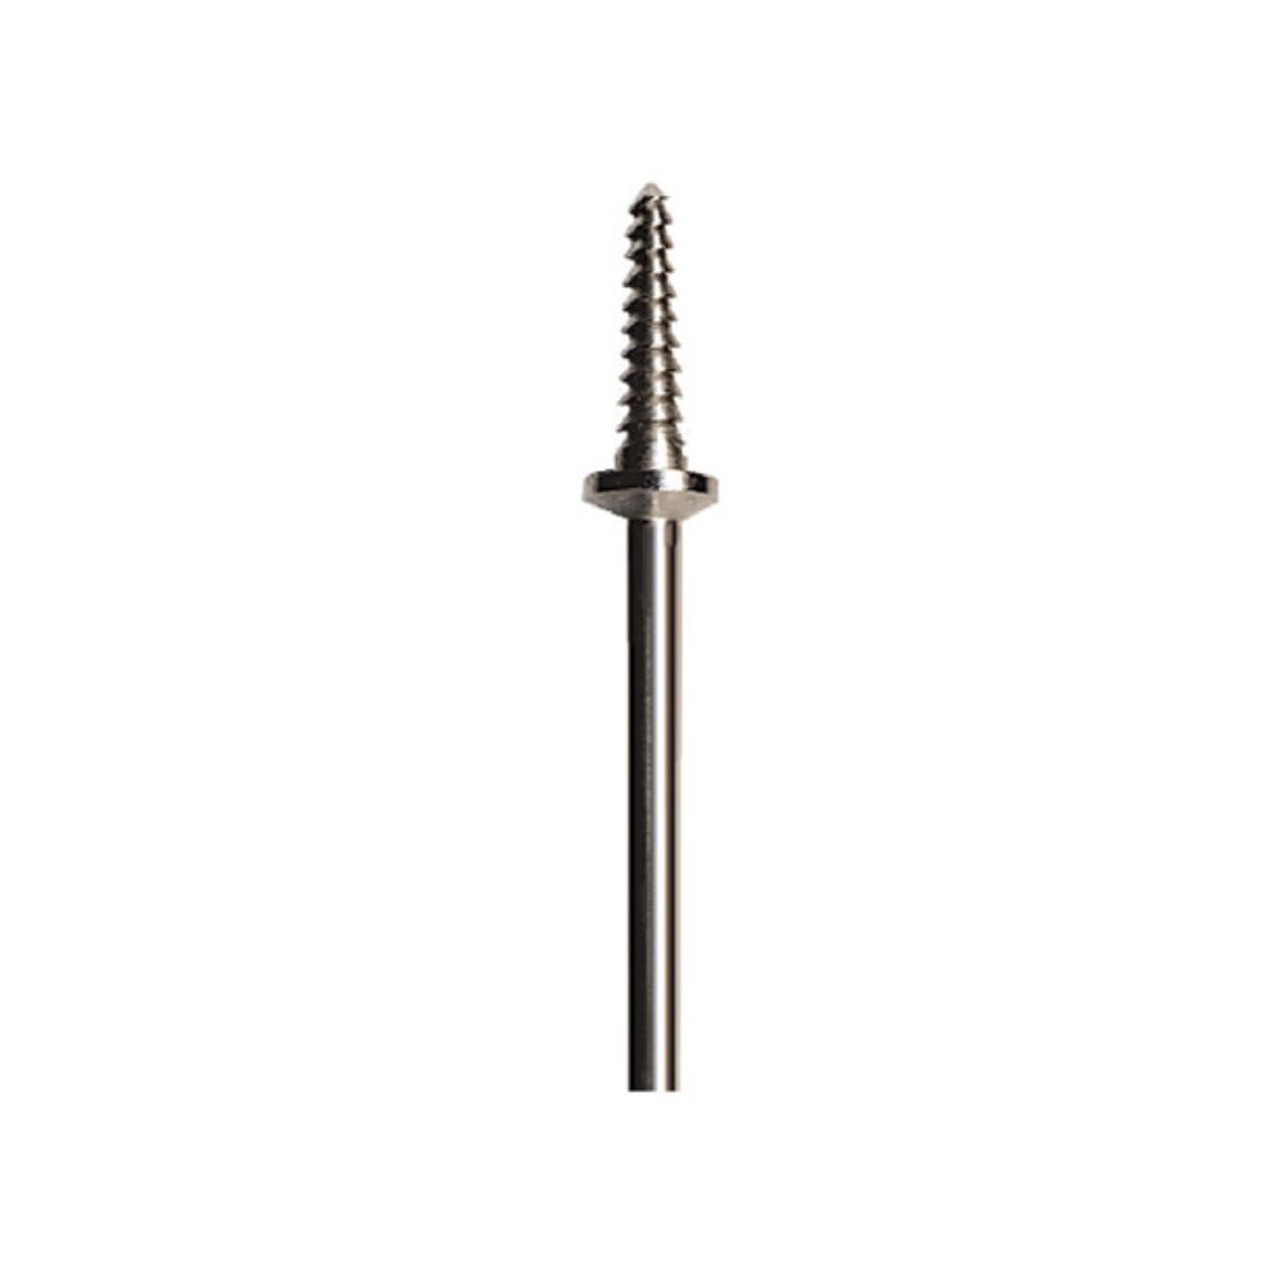 Foredom A-M7 Tapered Mandrel Shank - 3.17mm (1/8") 106-A-M7